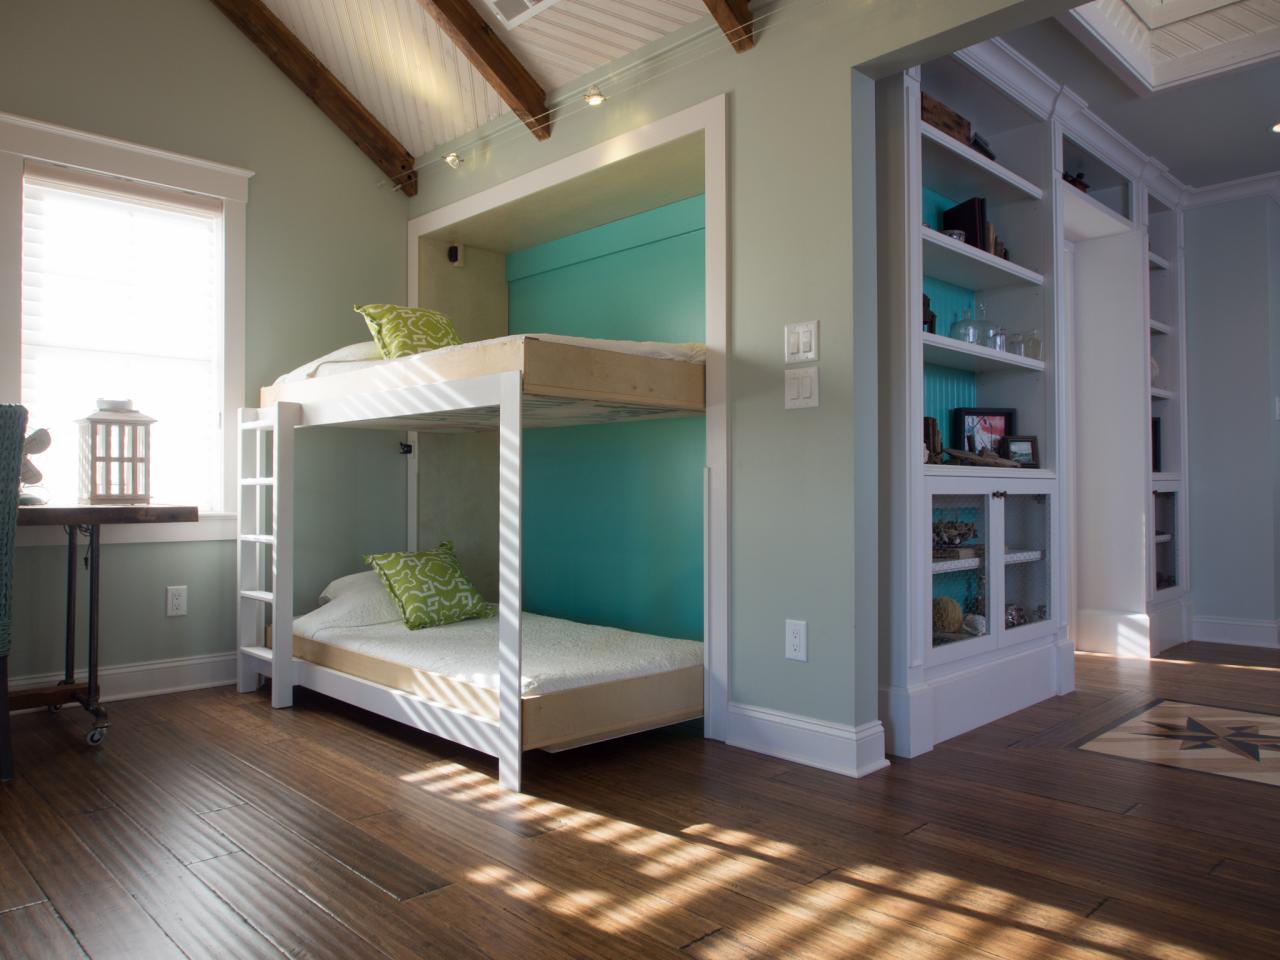 Build A Side Fold Murphy Bunk Bed, Built In Bunk Bed Plans With Stairs